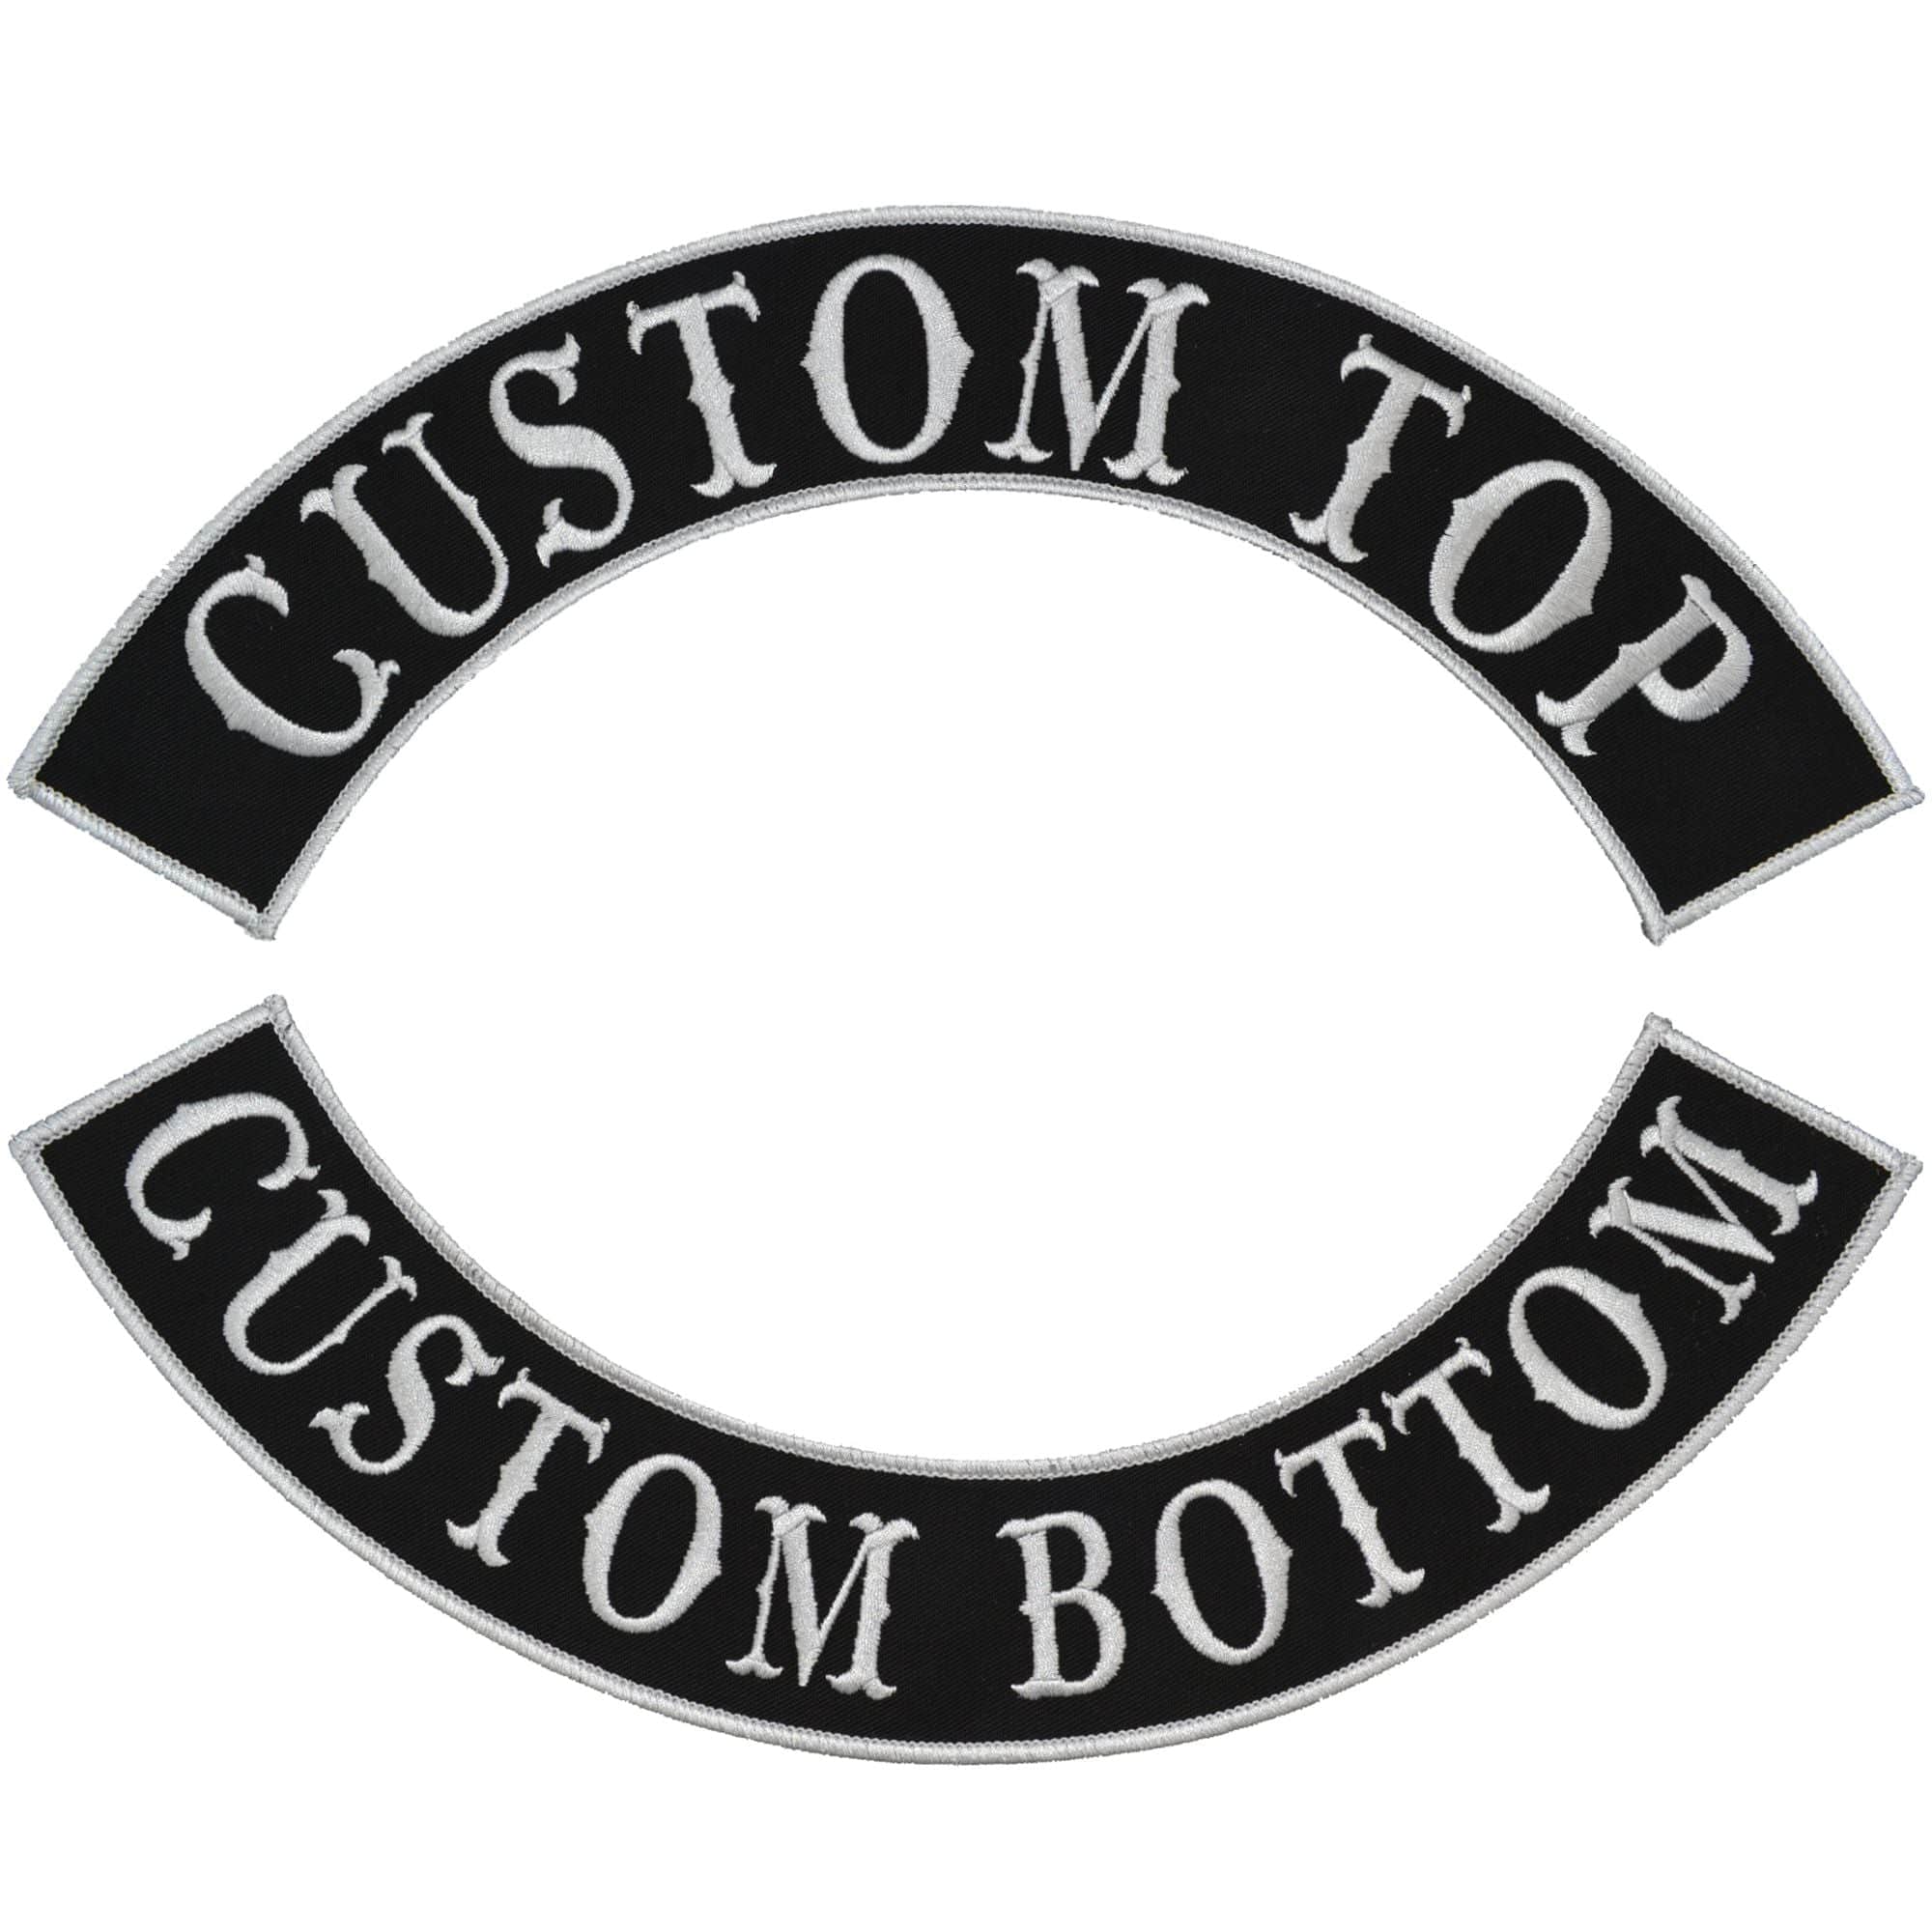 Tactical Gear Junkie Patches Custom Biker Vest Patch - Top and Bottom Arch Style Tab and Rocker - Sew On